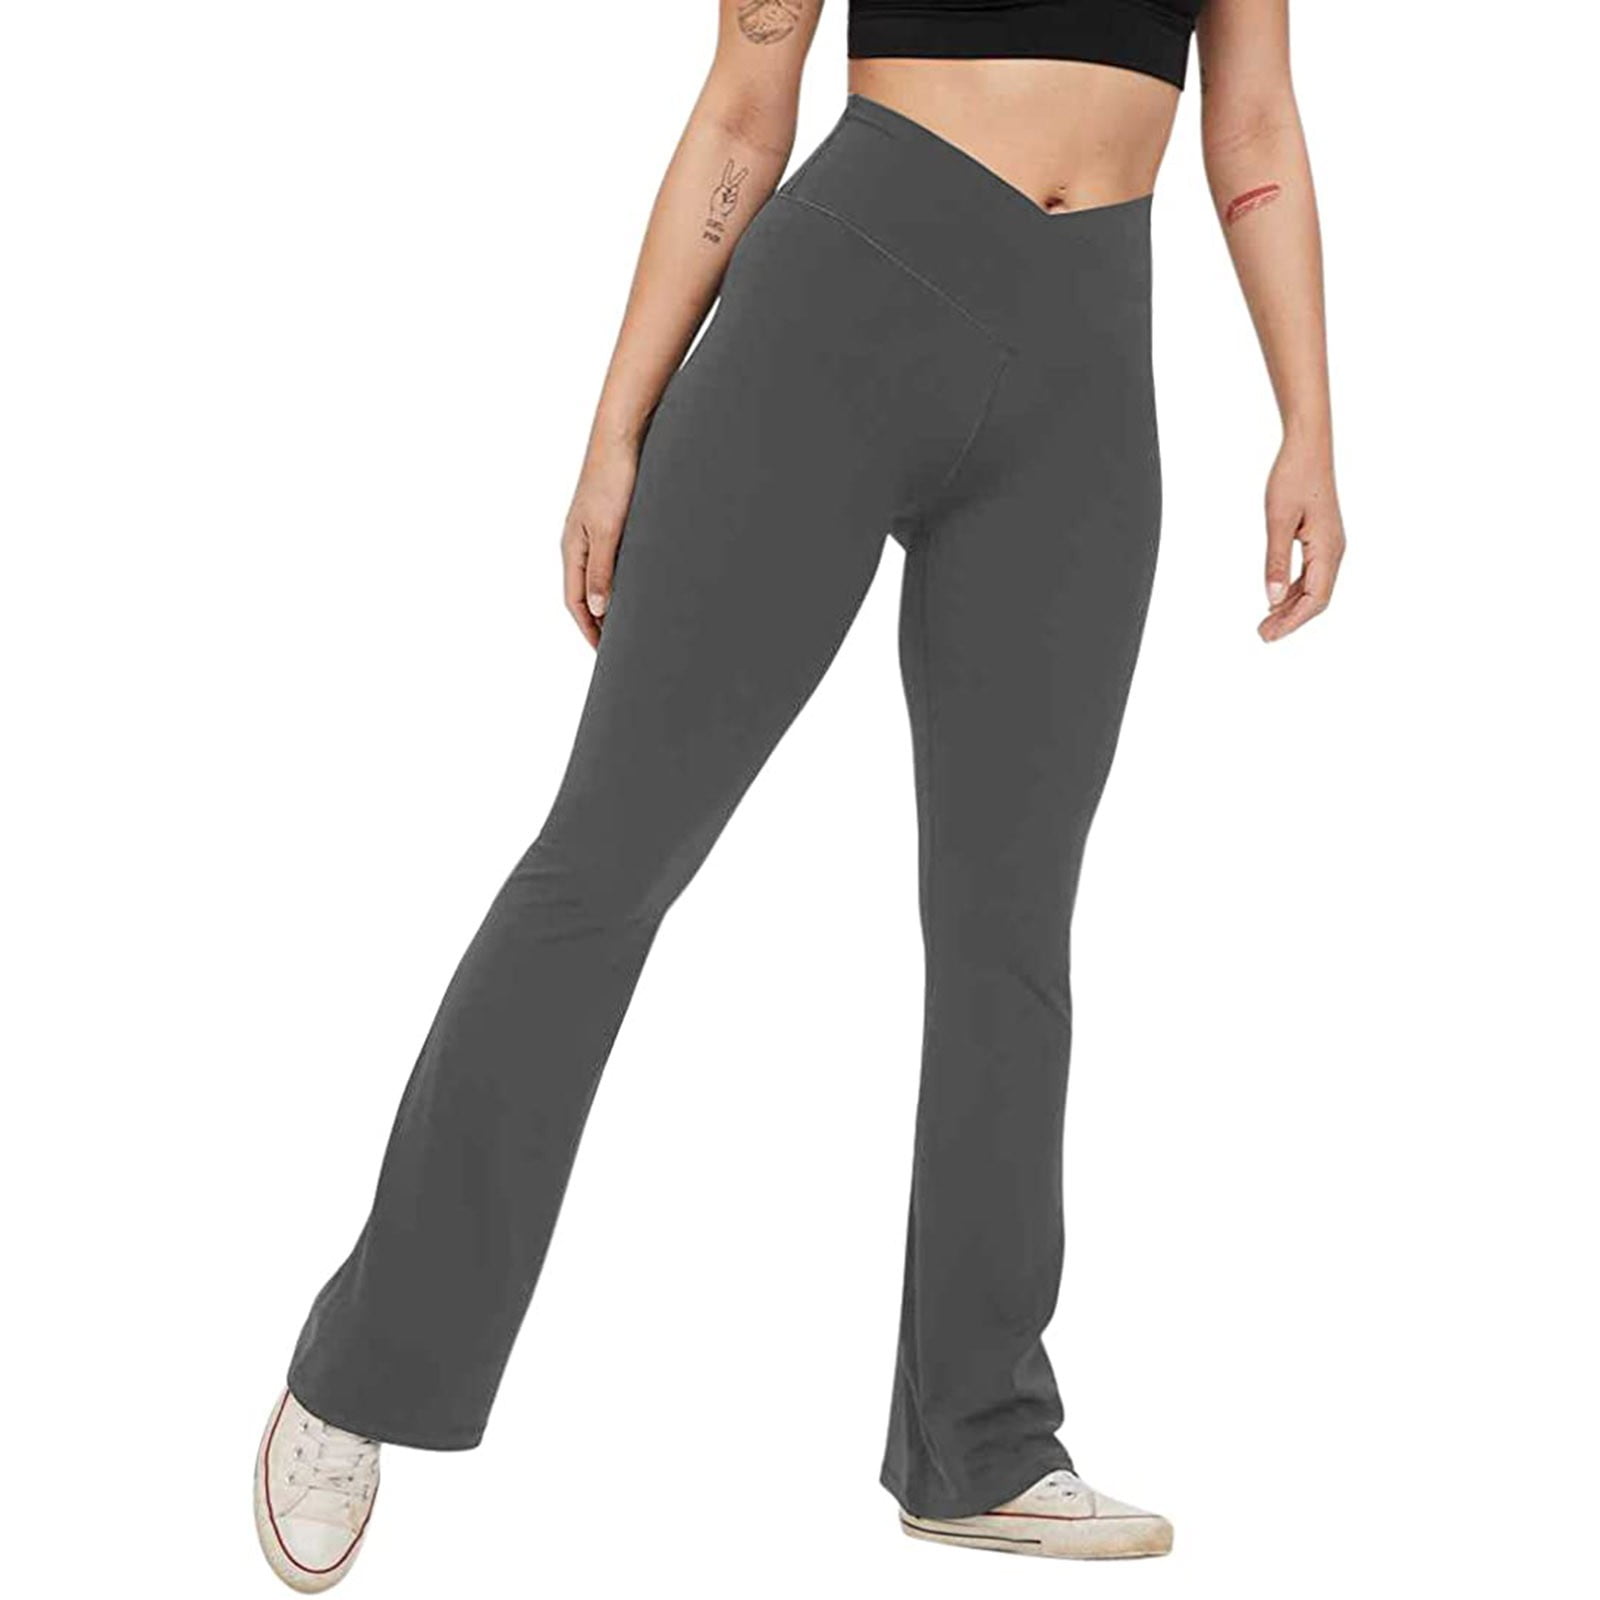 aerie, Pants & Jumpsuits, Aerie Double Crossover Flare Leggings